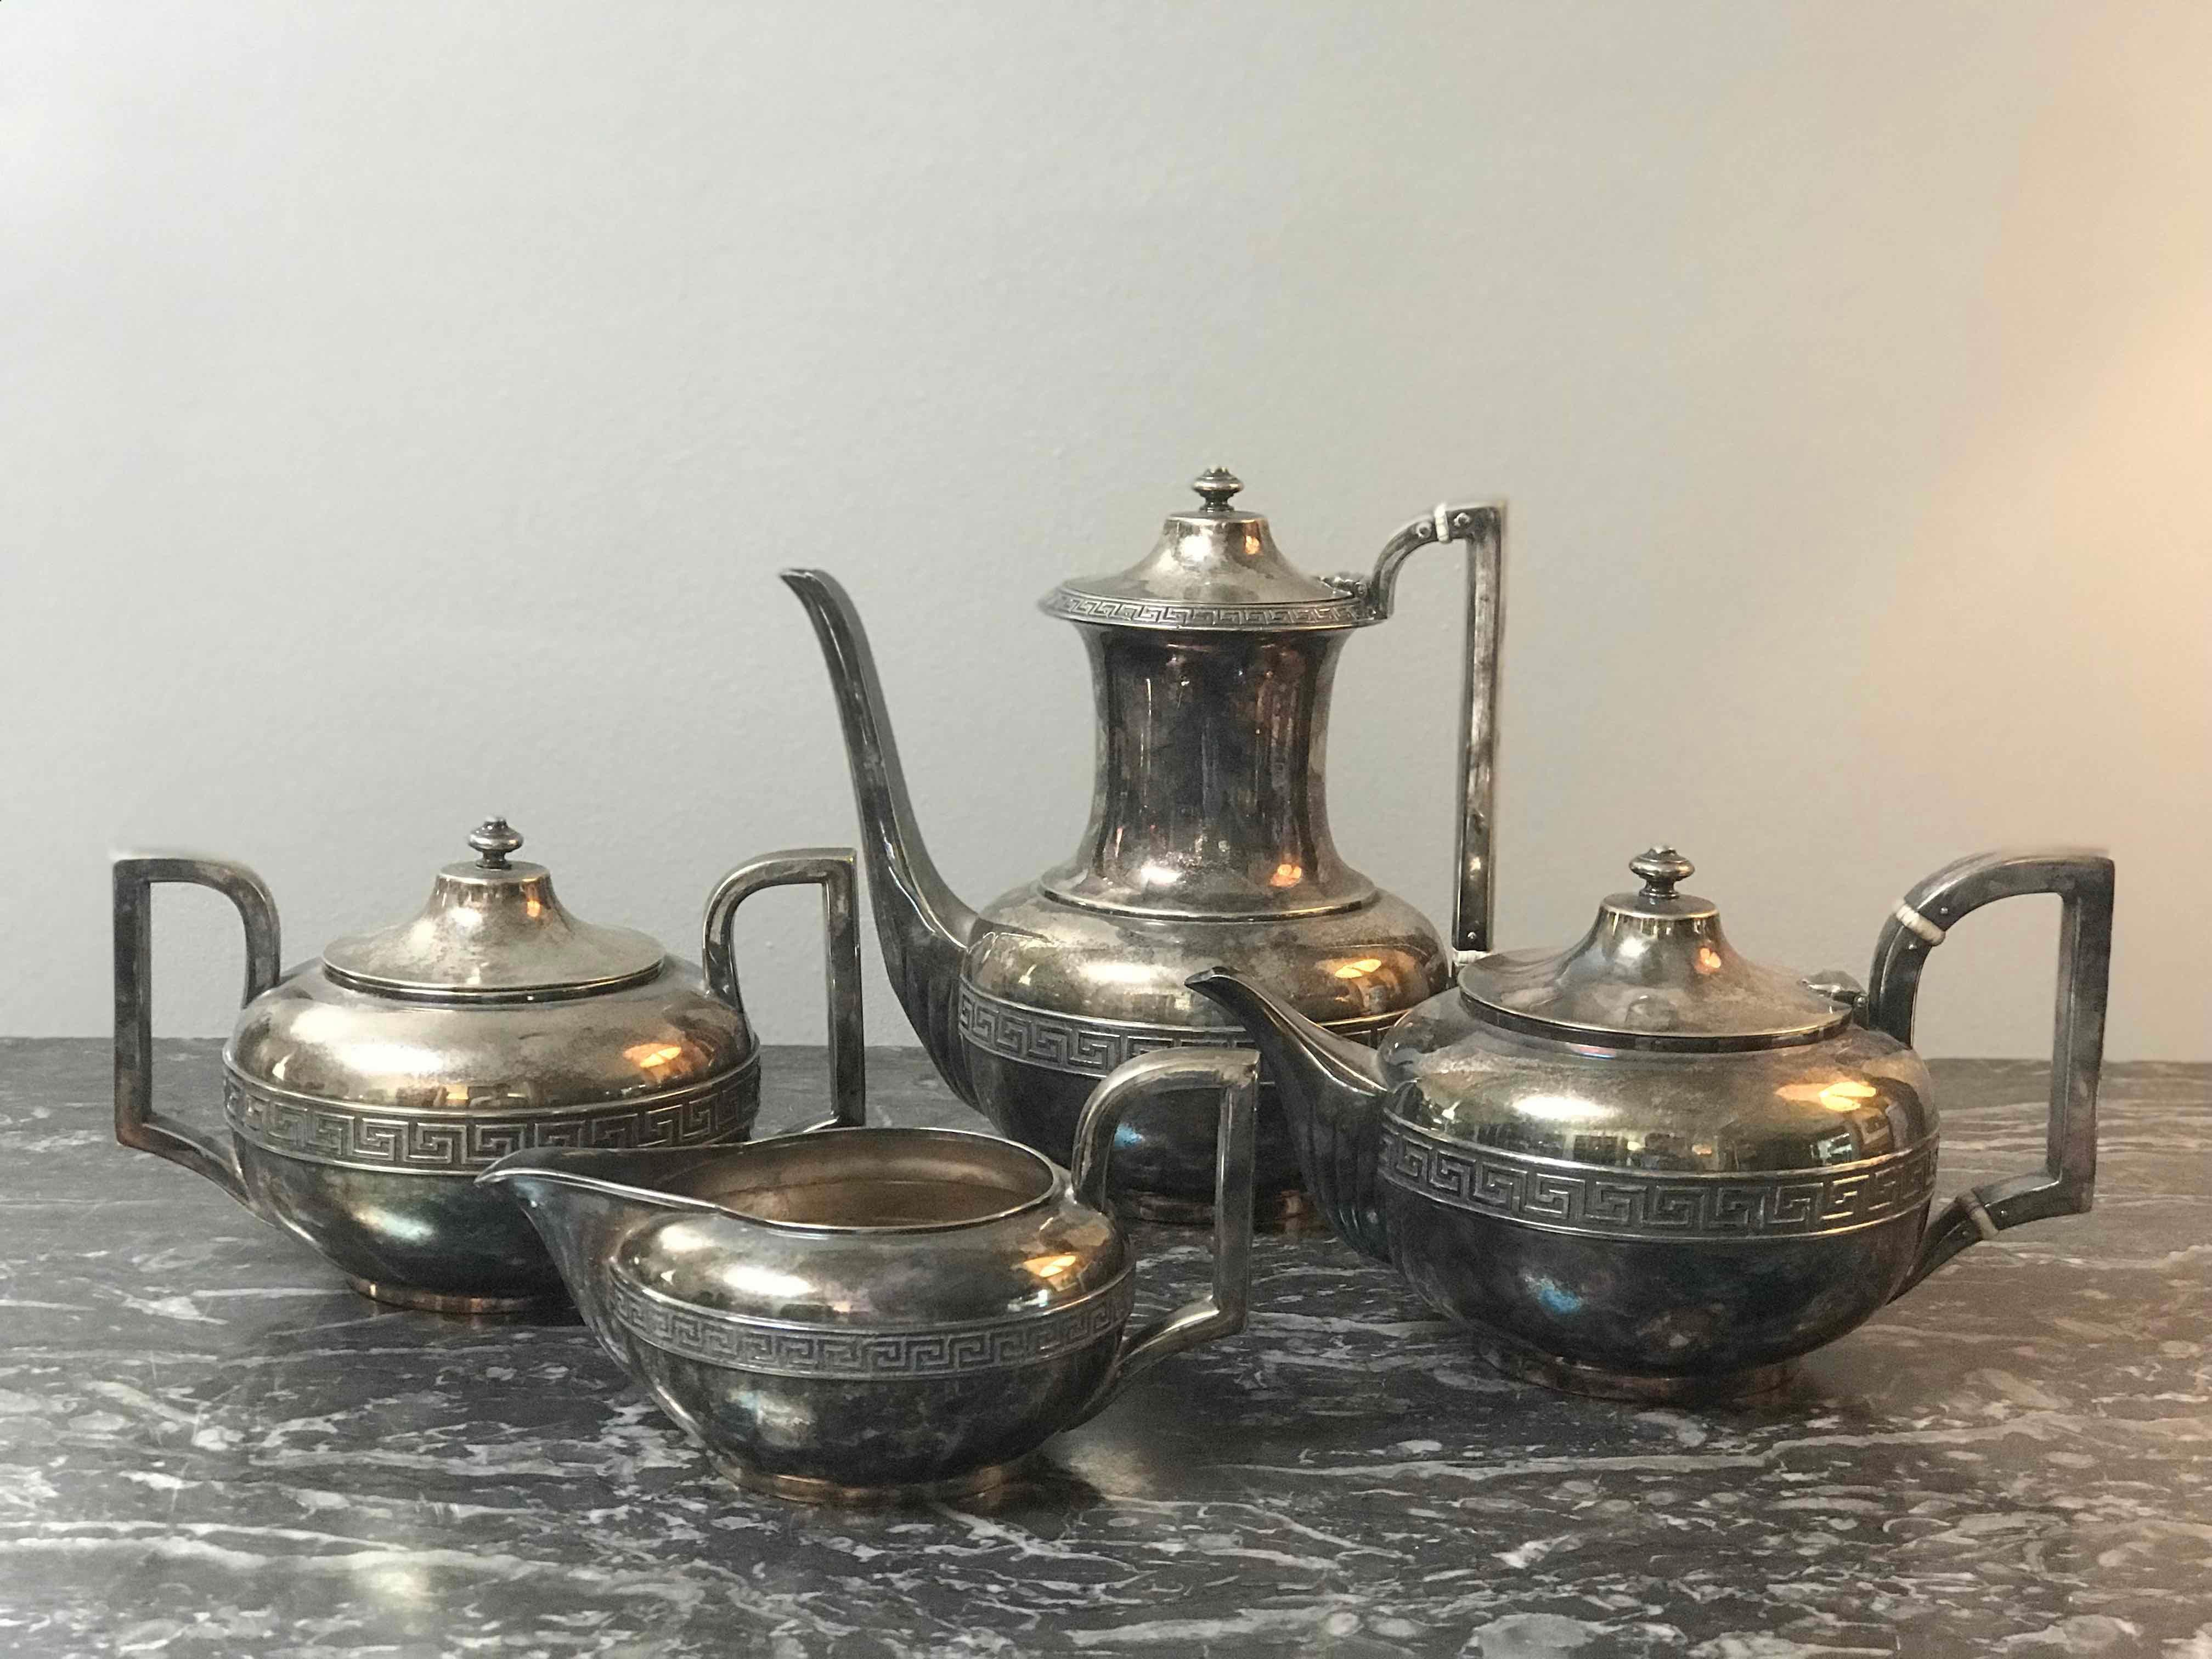 Four-piece Gorham silver-plated tea and coffee set from the 1920s. 